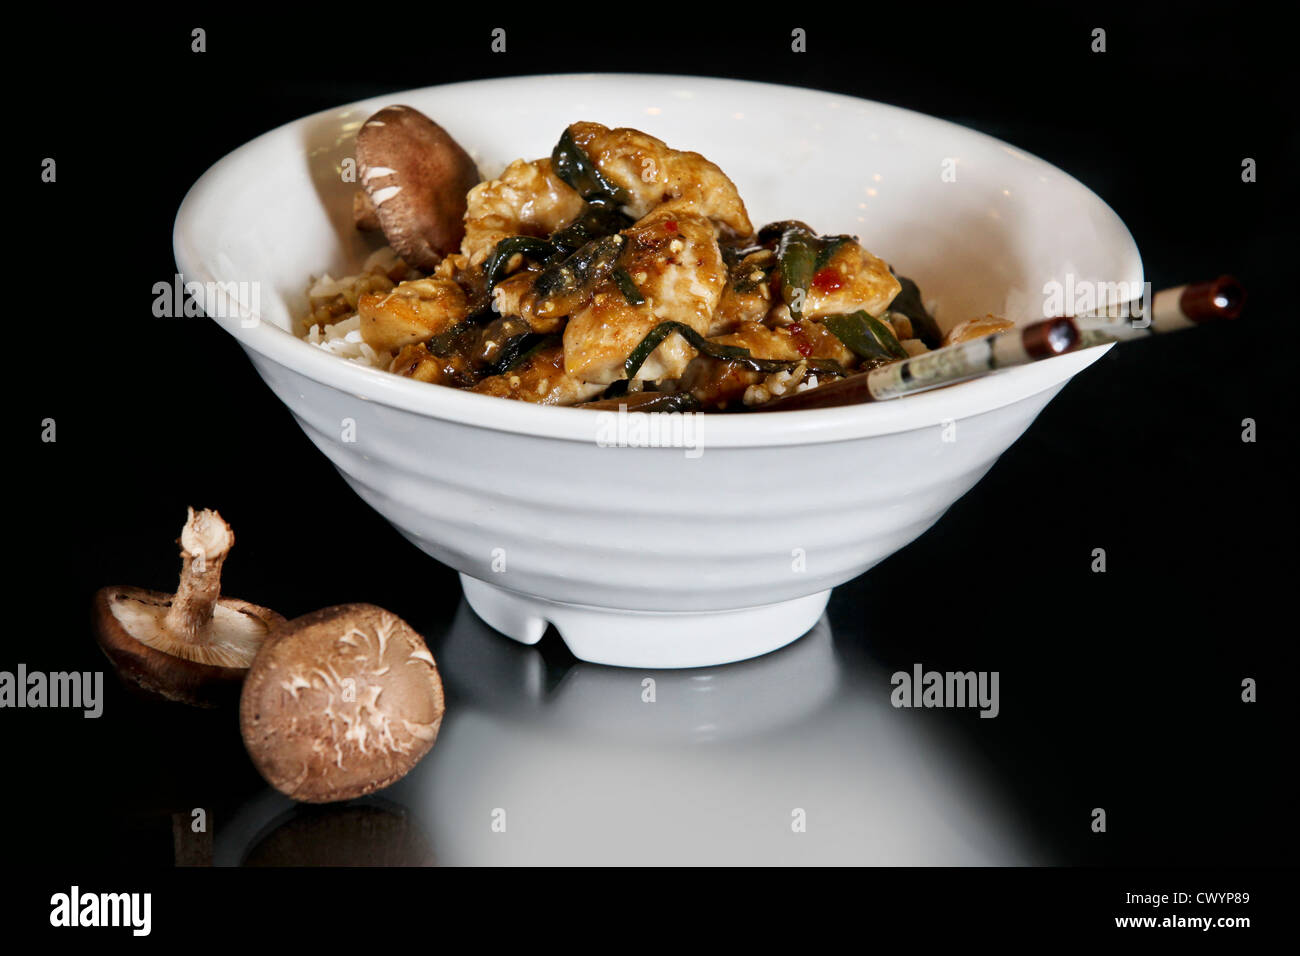 Thai stir fry meal with chicken and mushrooms Stock Photo